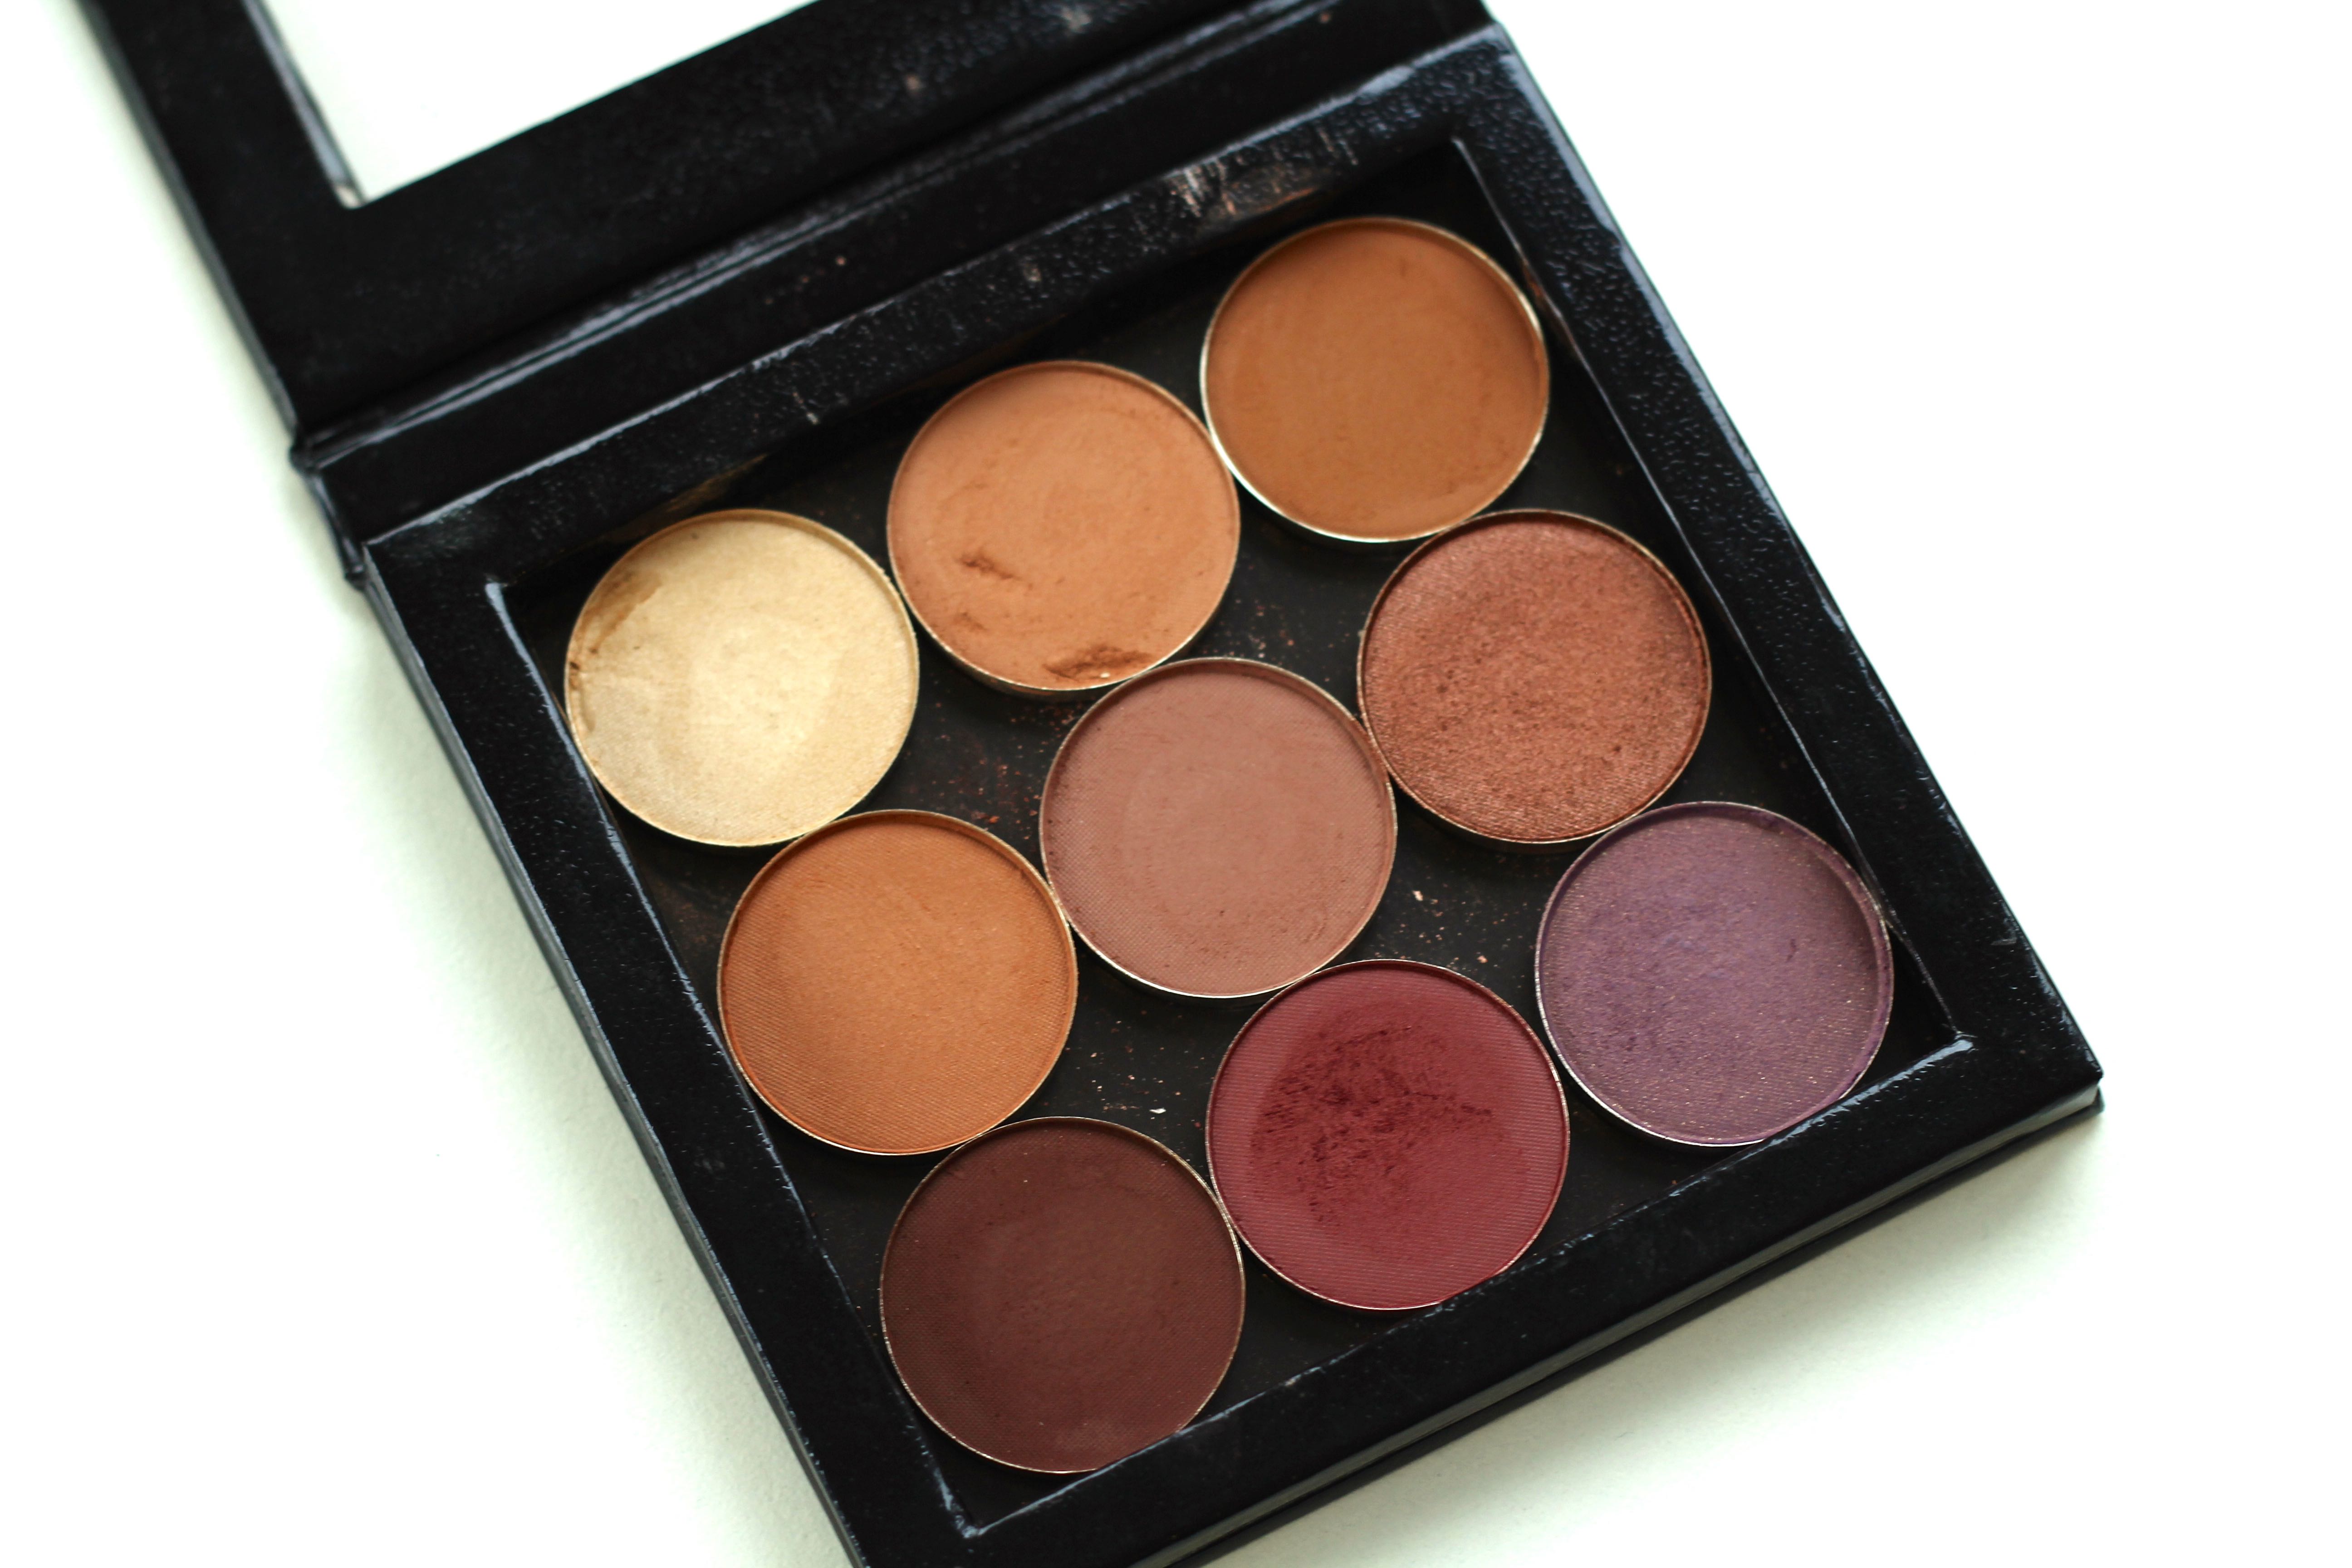 Morphe EyeShadows including Jaclyn Hill Favourites by Face Made Up